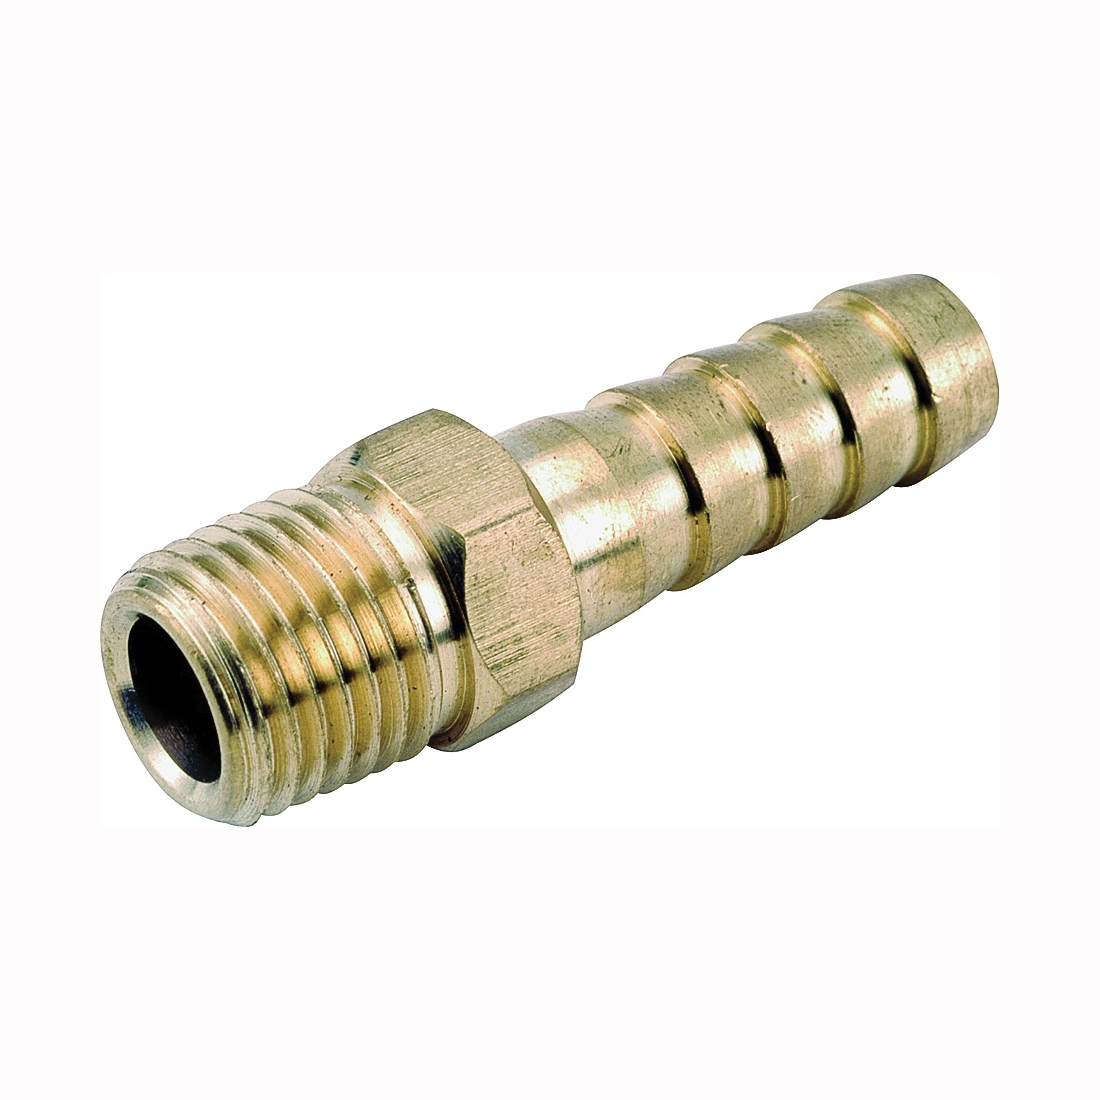 Anderson Metals 129 Series 757001-1208 Hose Adapter, 3/4 in, Barb, 1/2 in, MPT, Brass - 1